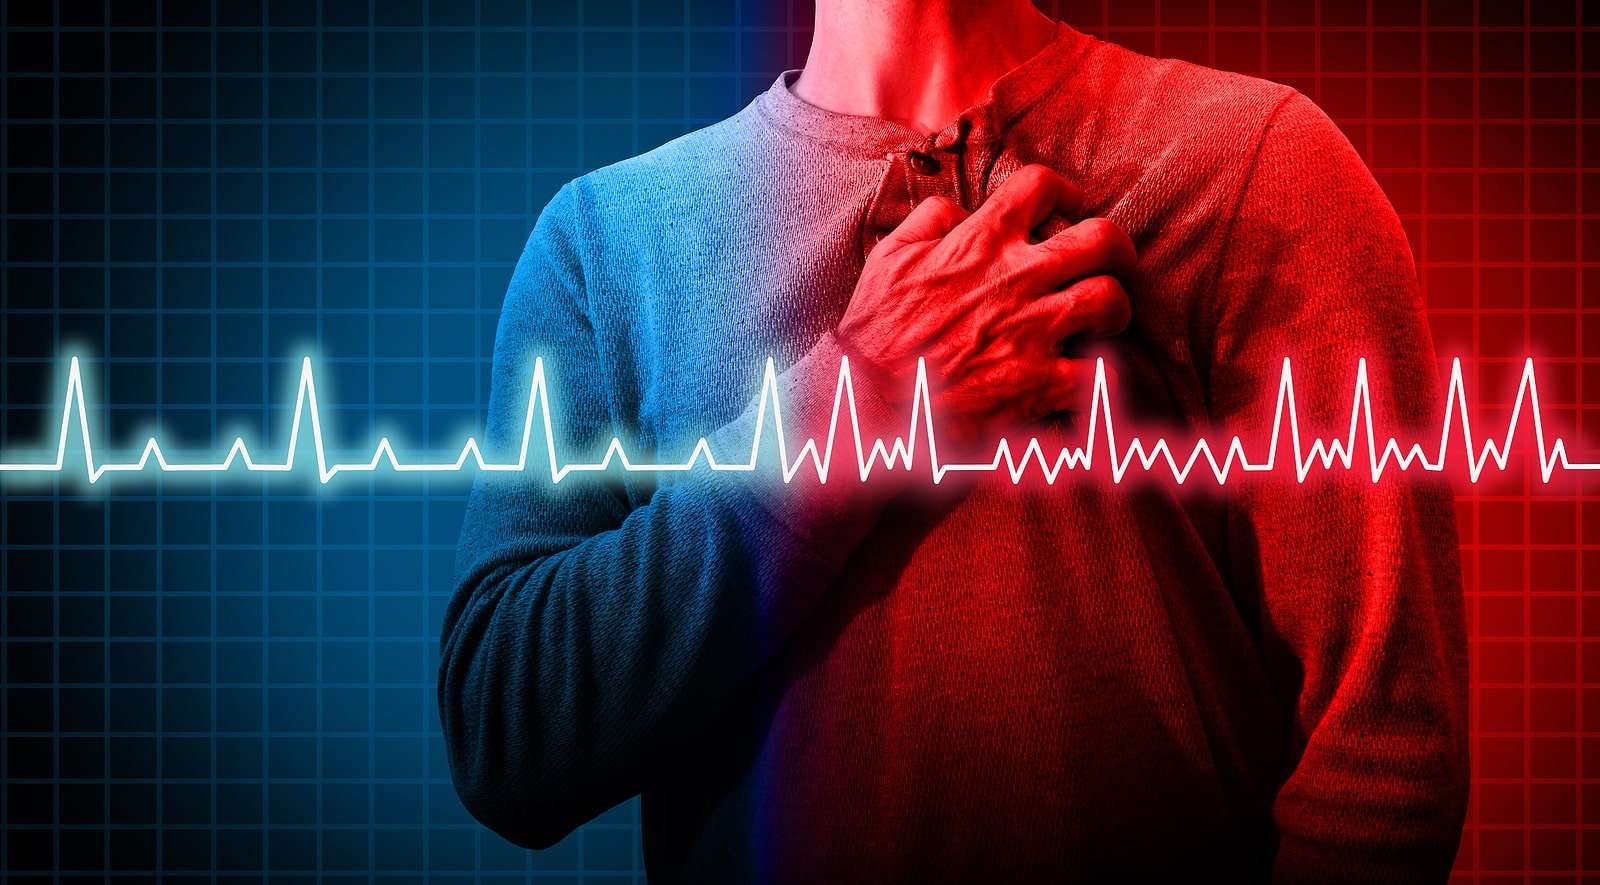 When to Seek Medical Help for Chest Pain